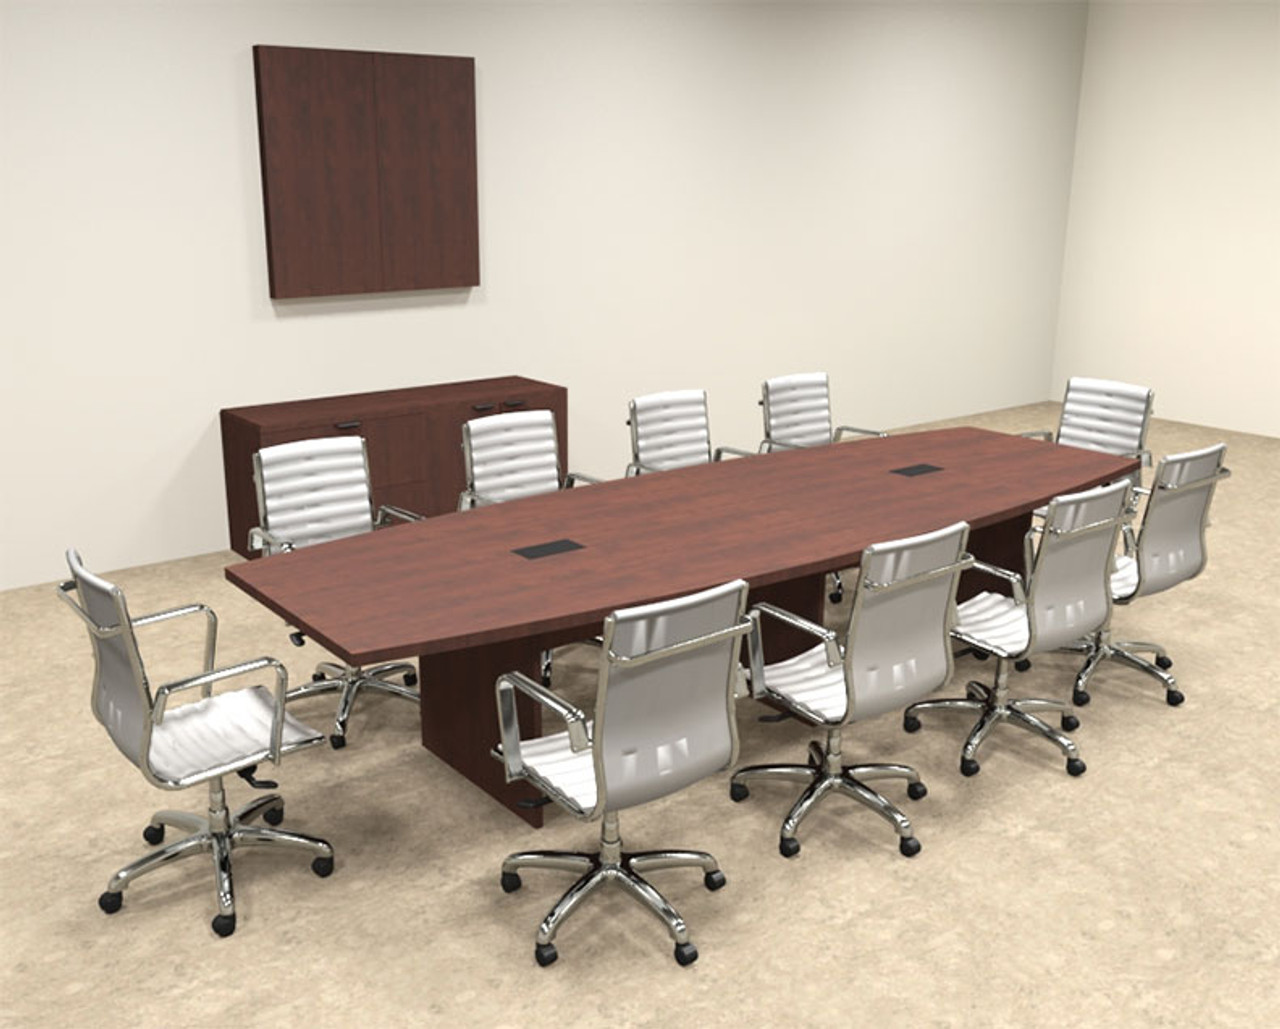 Modern Boat Shapedd 12' Feet Conference Table, #OF-CON-C62